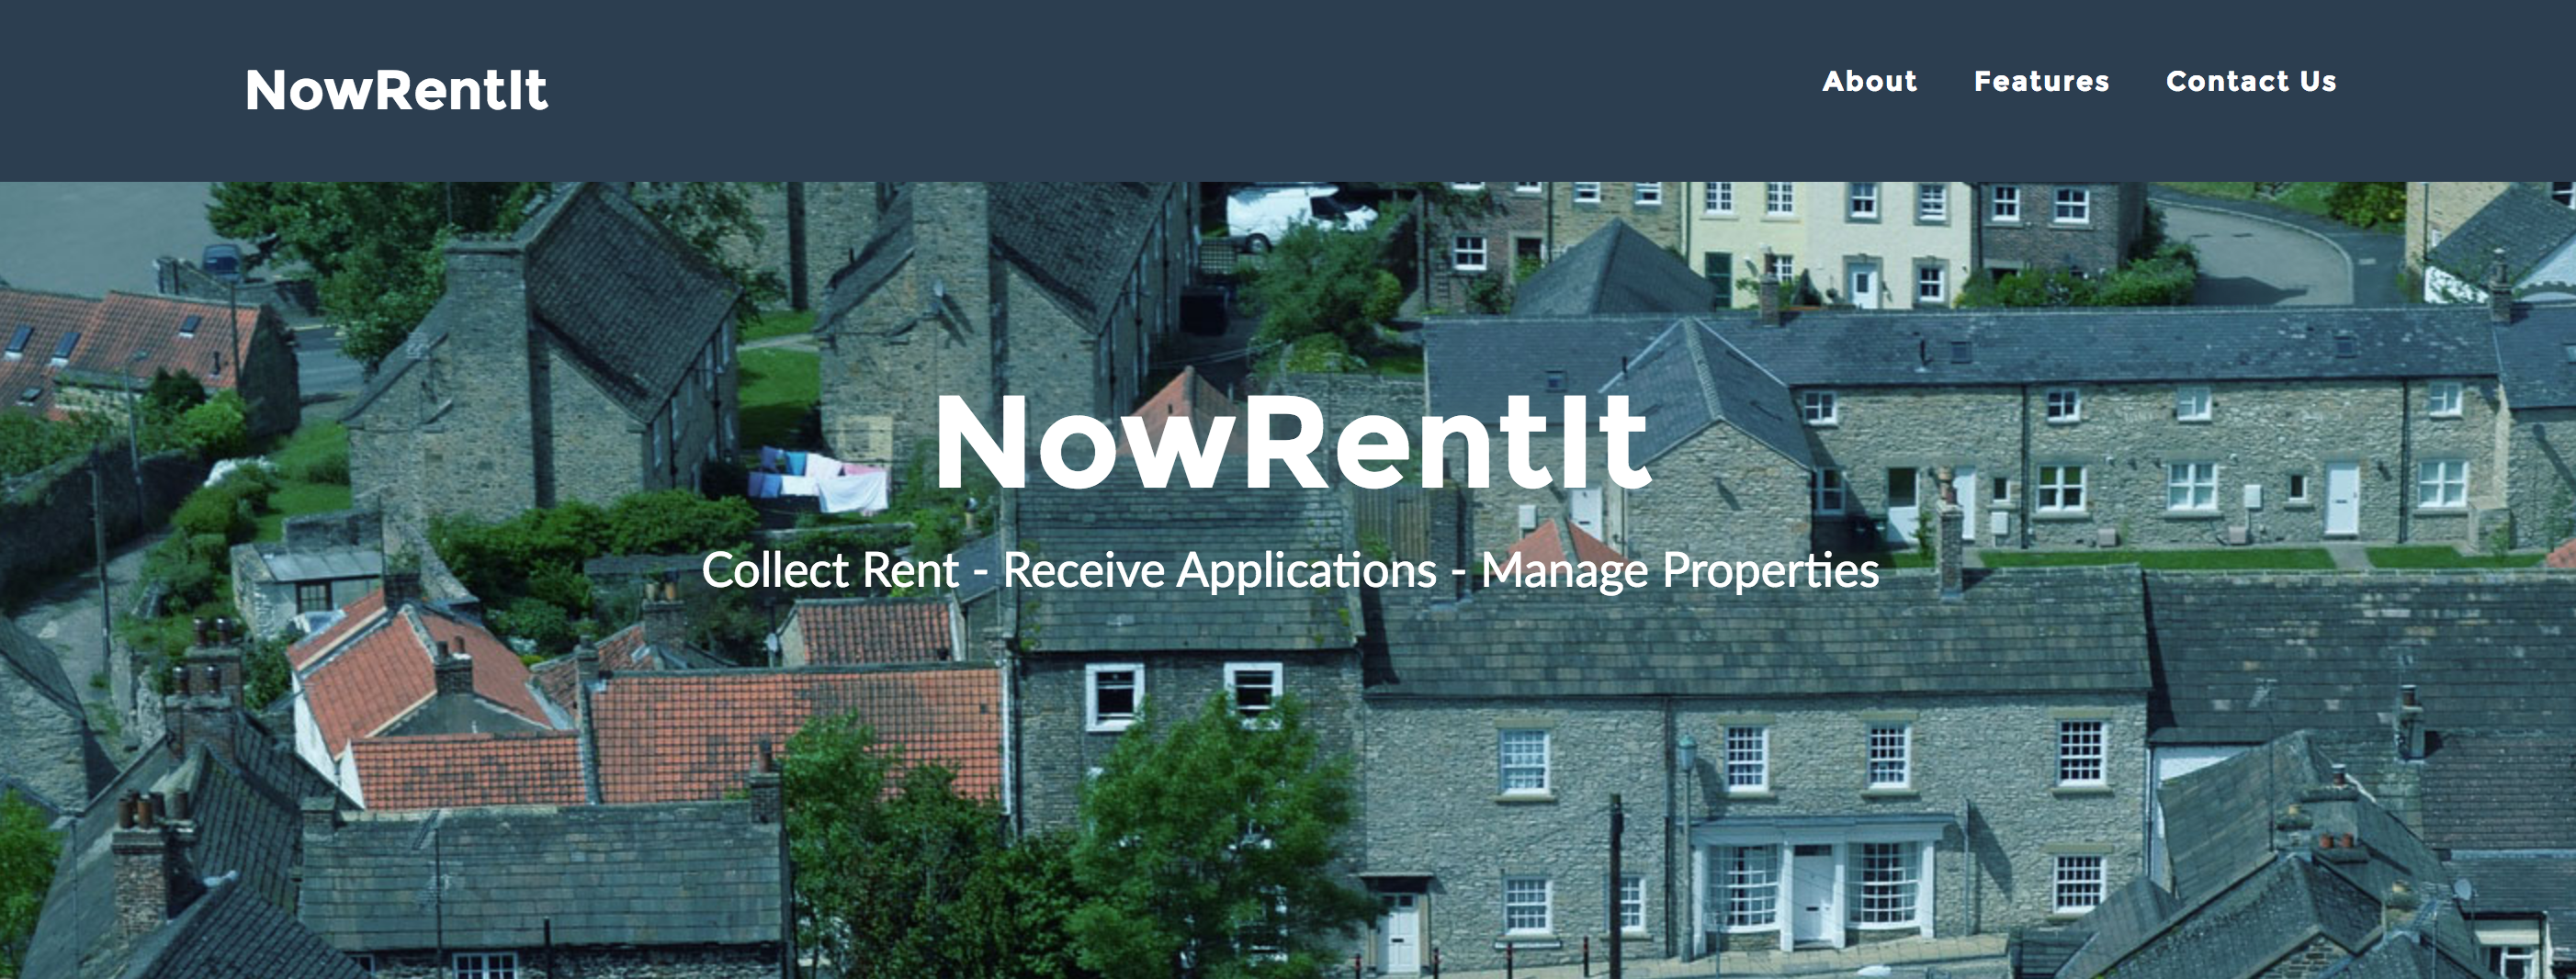 NowRentIt homepage design: collect rent, receive applications, manage properties